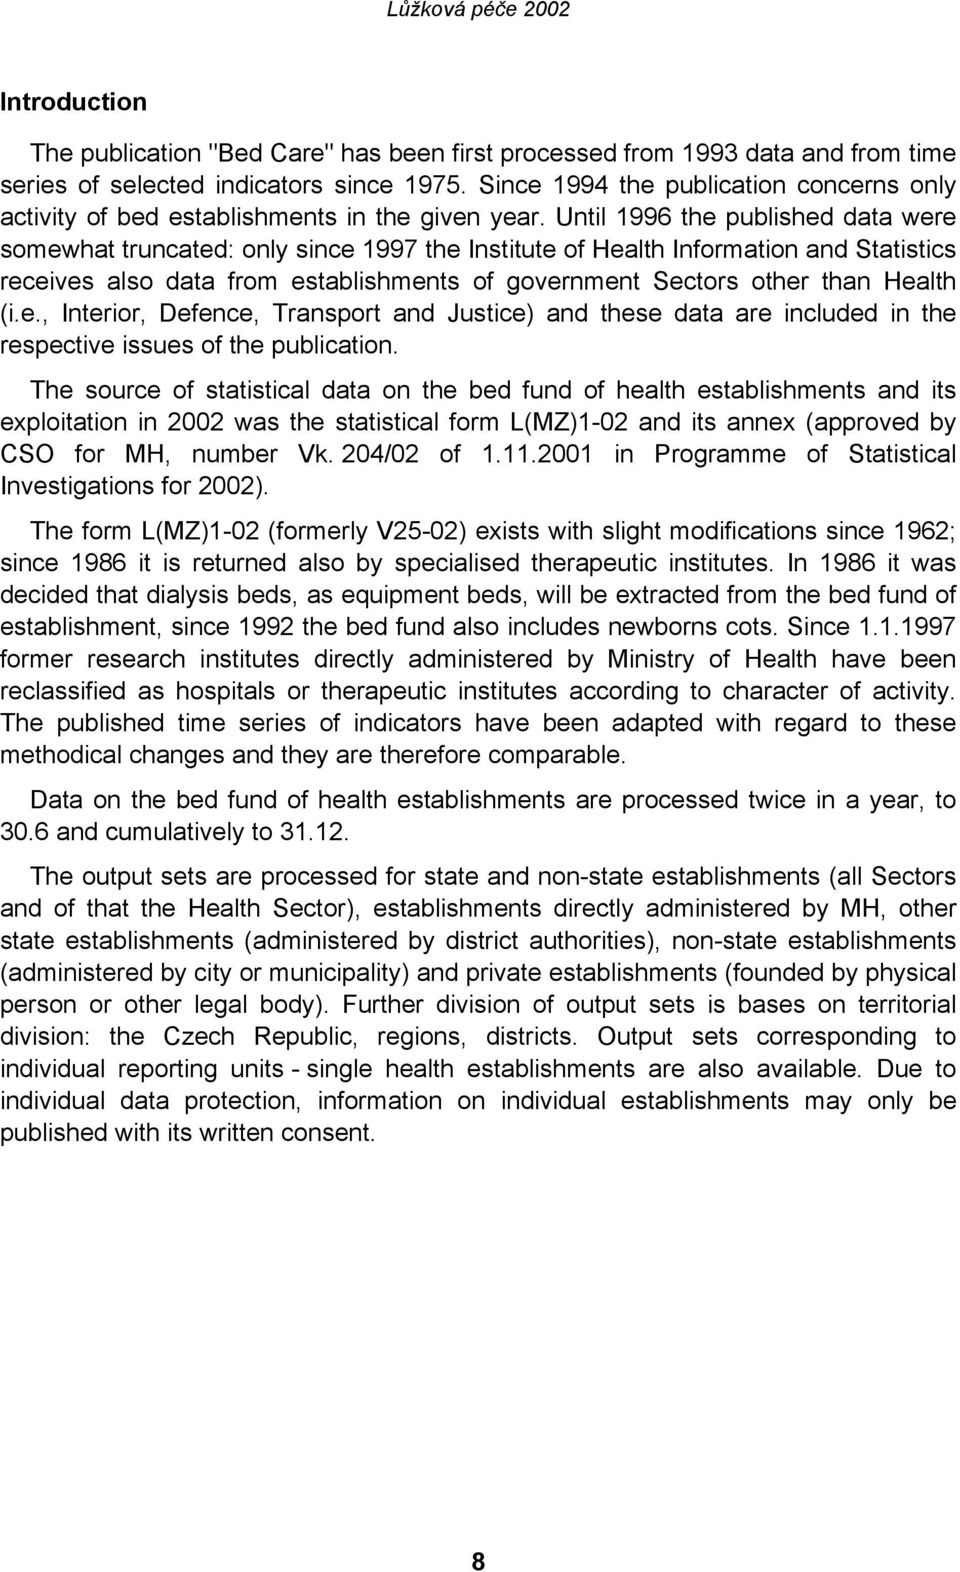 Until 1996 the published data were somewhat truncated: only since 1997 the Institute of Health Information and Statistics receives also data from establishments of government Sectors other than